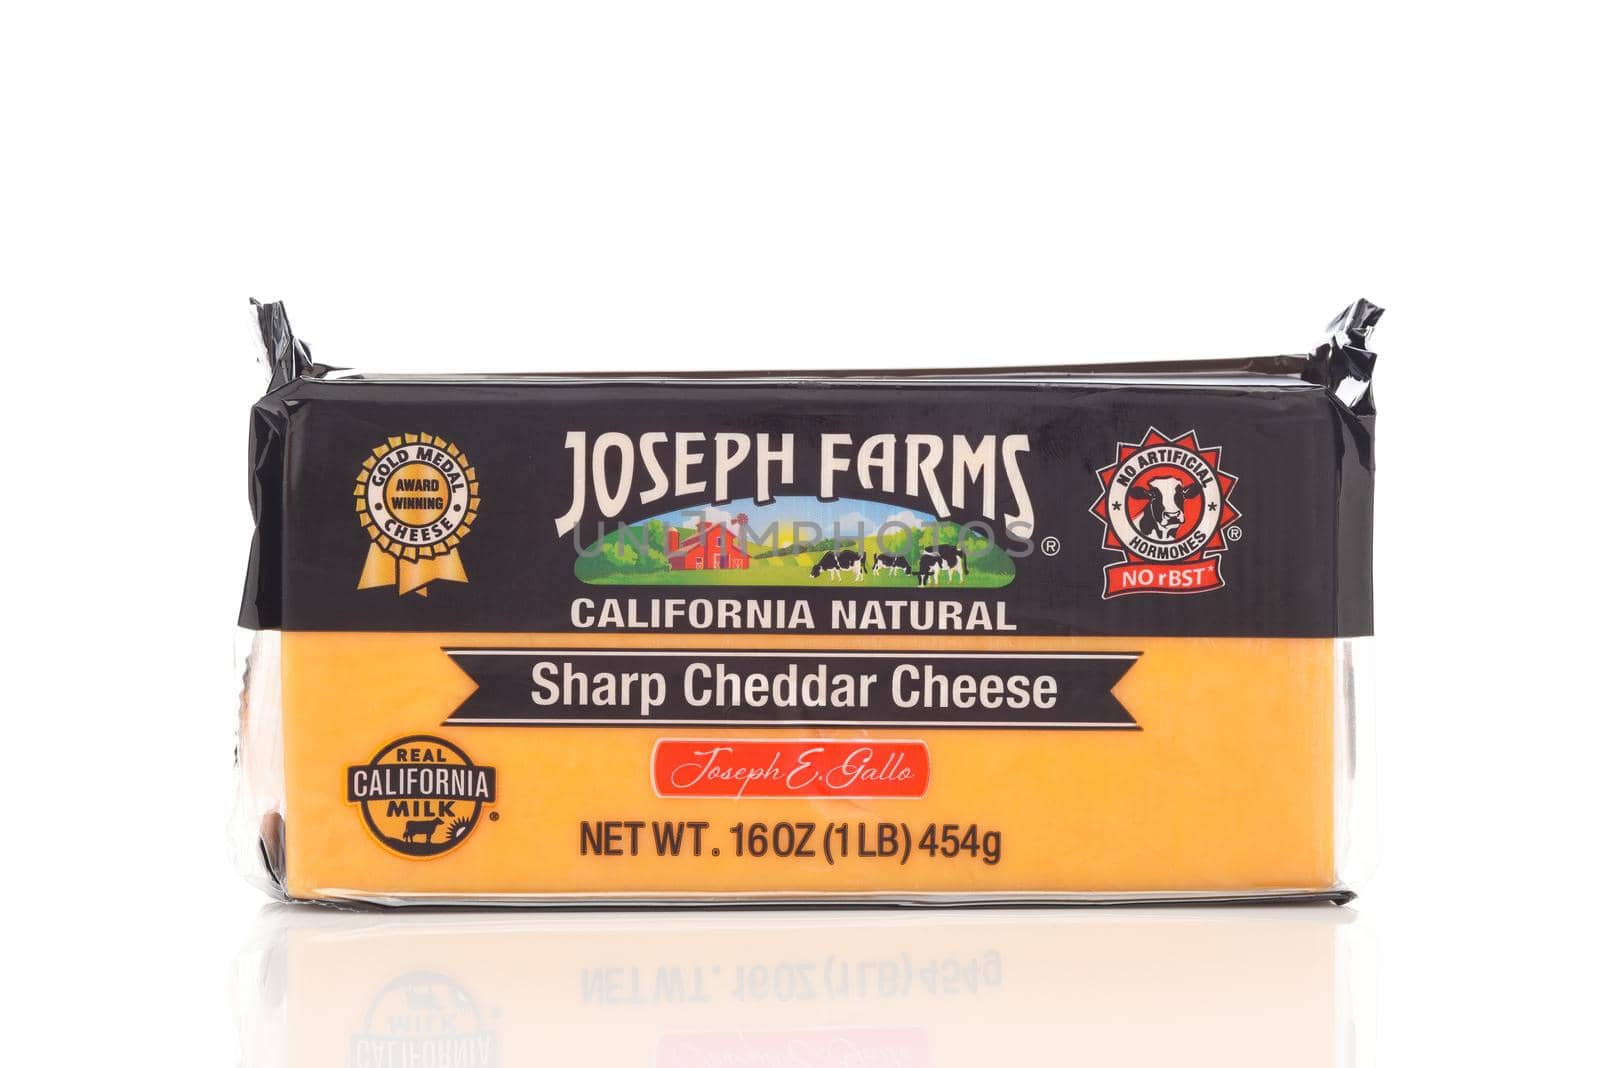 IRVINE, CALIFORNIA - MAY 20, 2019: A 16 ounce package of Joseph Farms California Natural Sharp Cheddar Cheese.